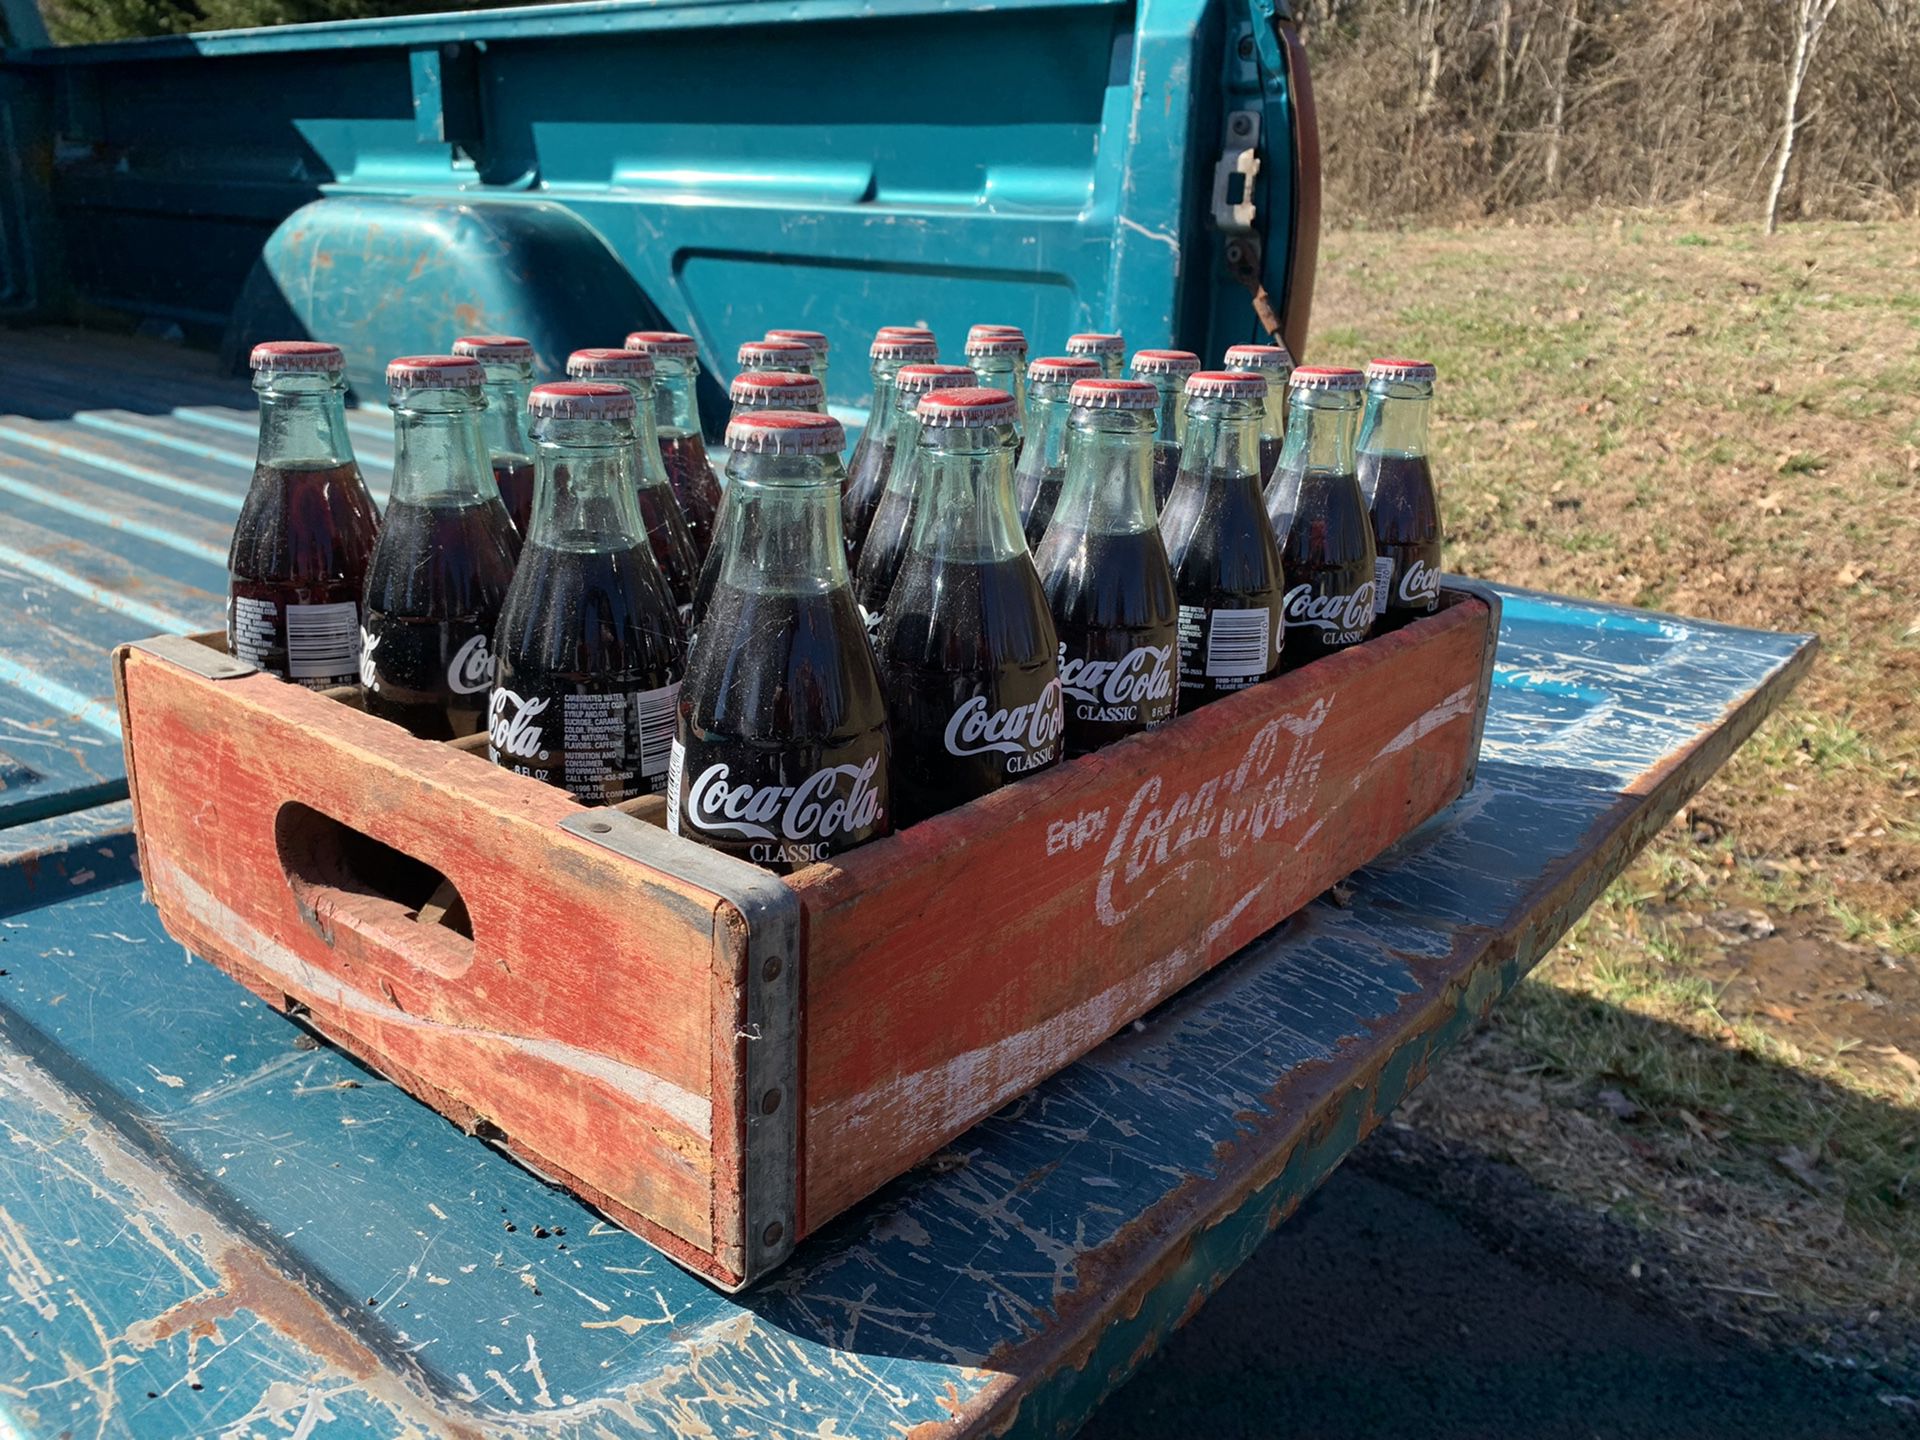 Coca Cola bottles and case